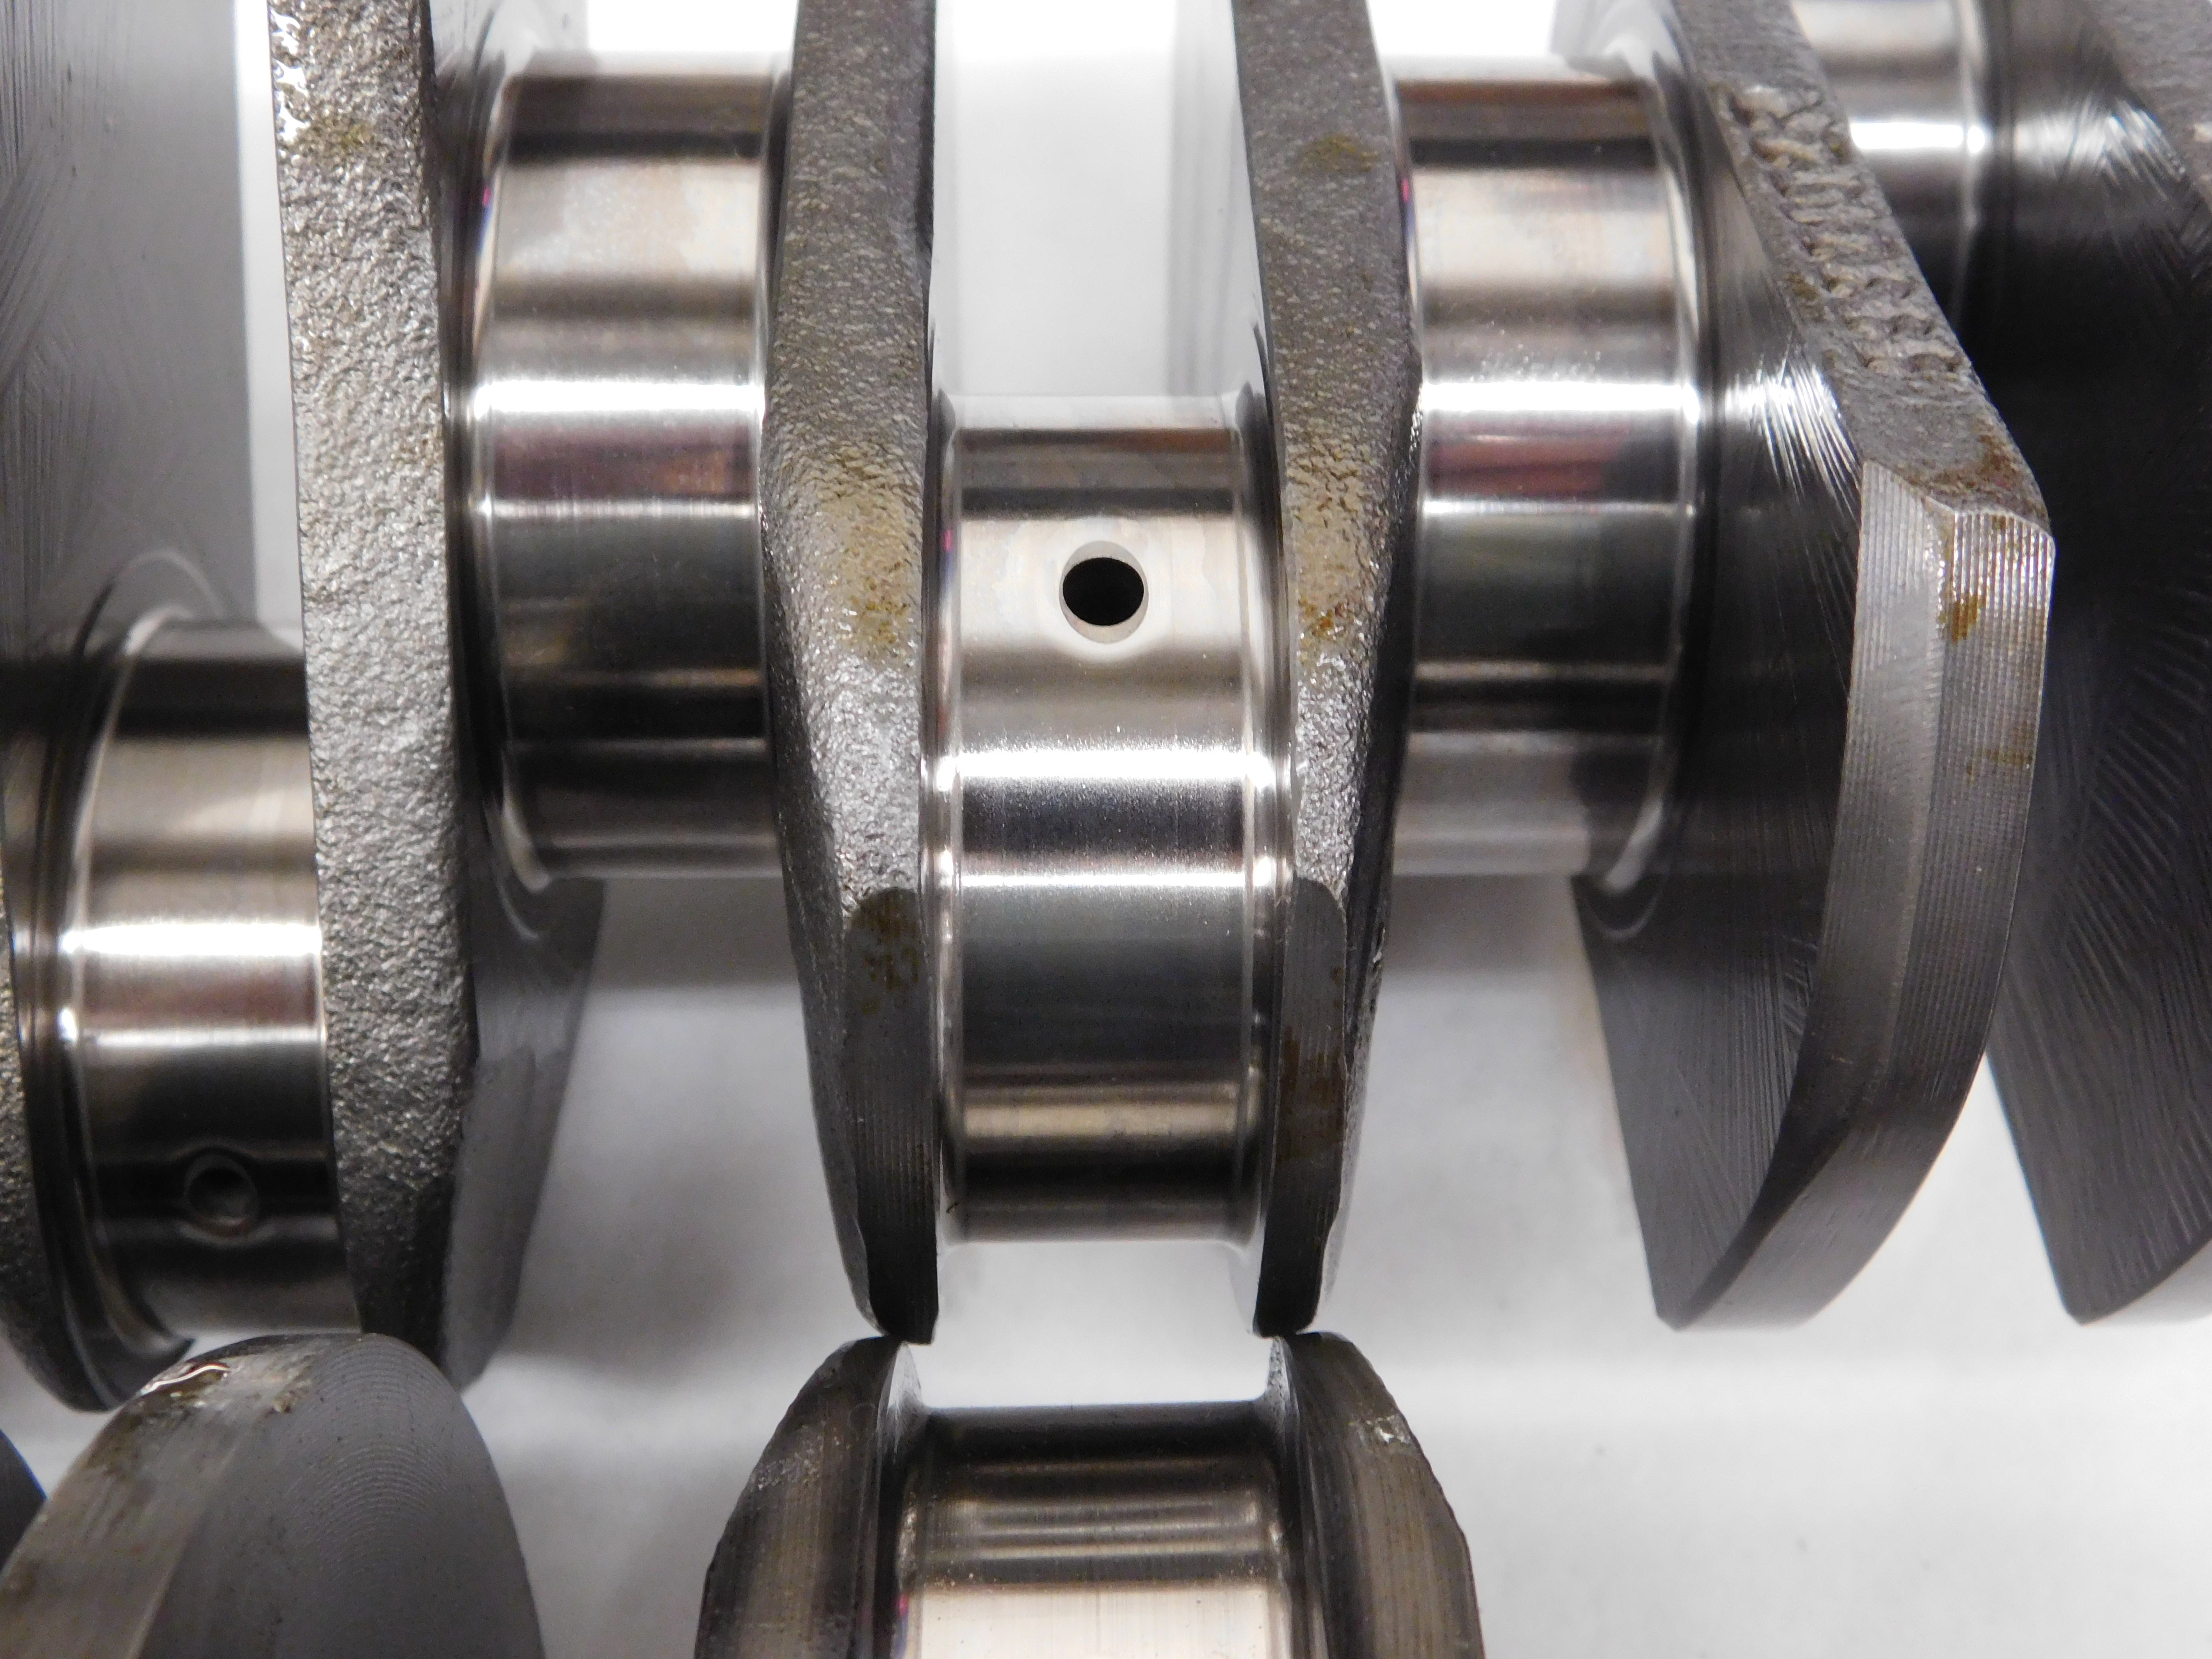 996 and 997 Turbo Crankshafts and Rod Bearings –